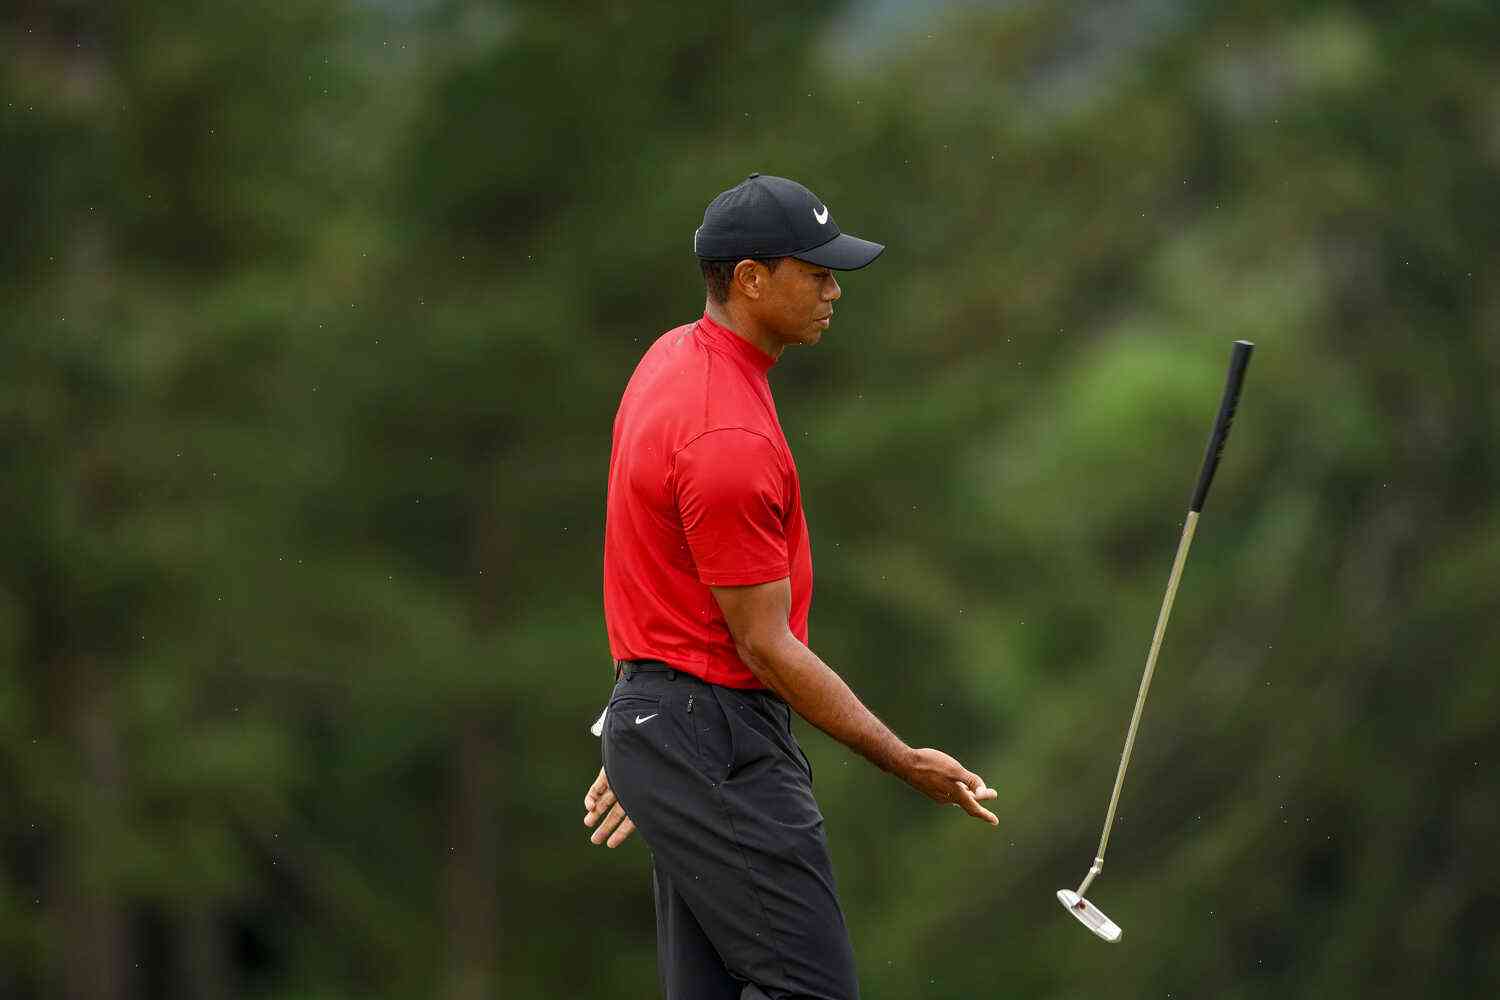 Tiger Woods' return to golf confirmed after 18 months out